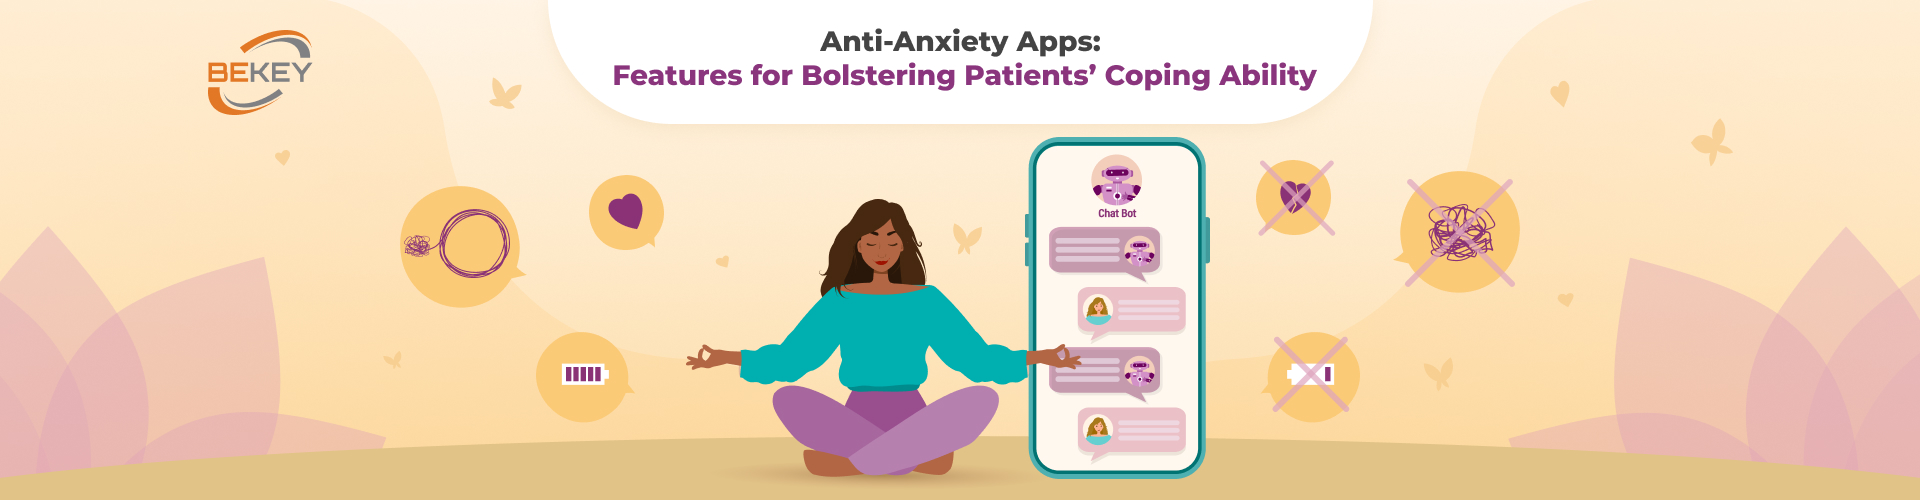 Anti-Anxiety Apps: Features for Bolstering Patients’ Coping Ability - image